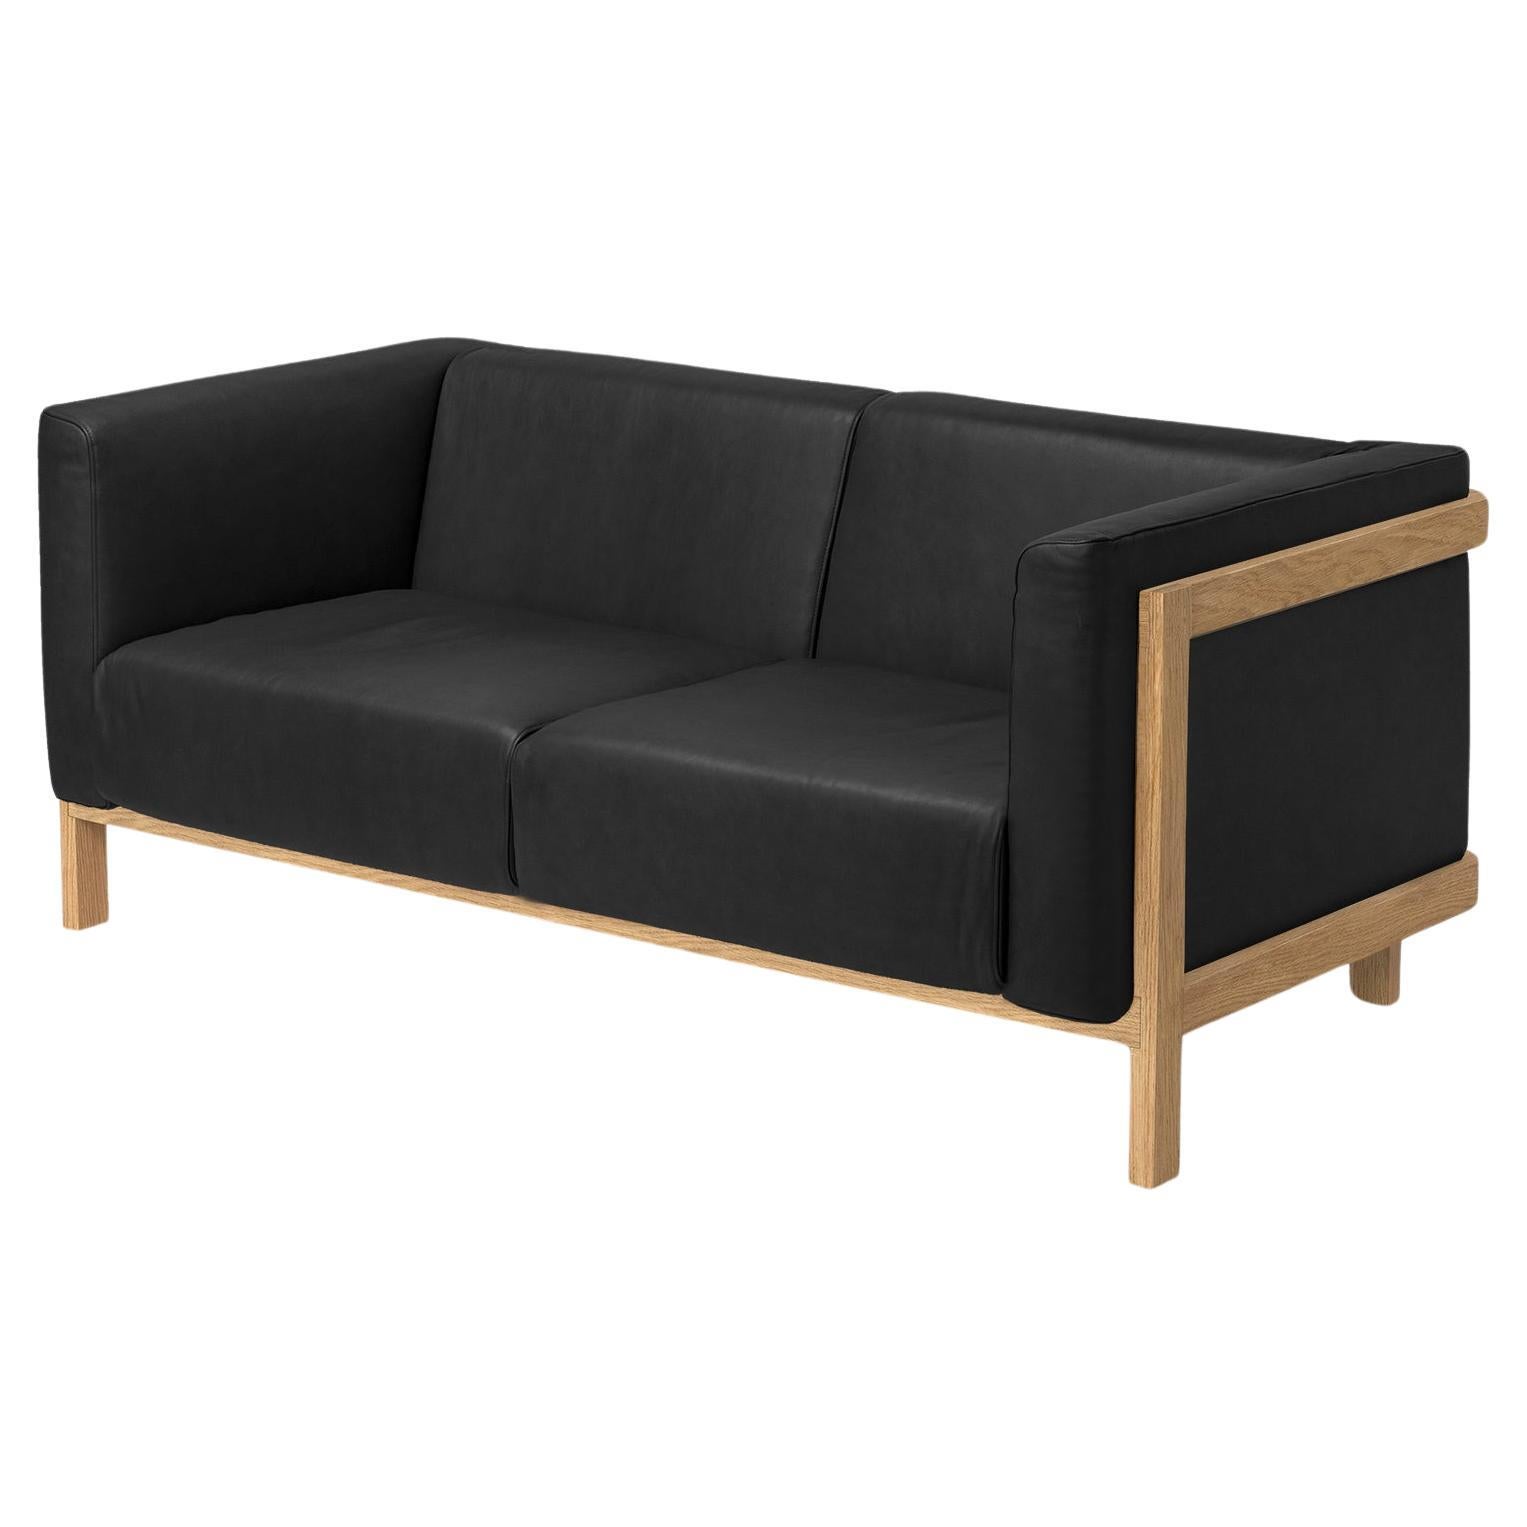 Minimalist two seater sofa oak - leather upholstered For Sale